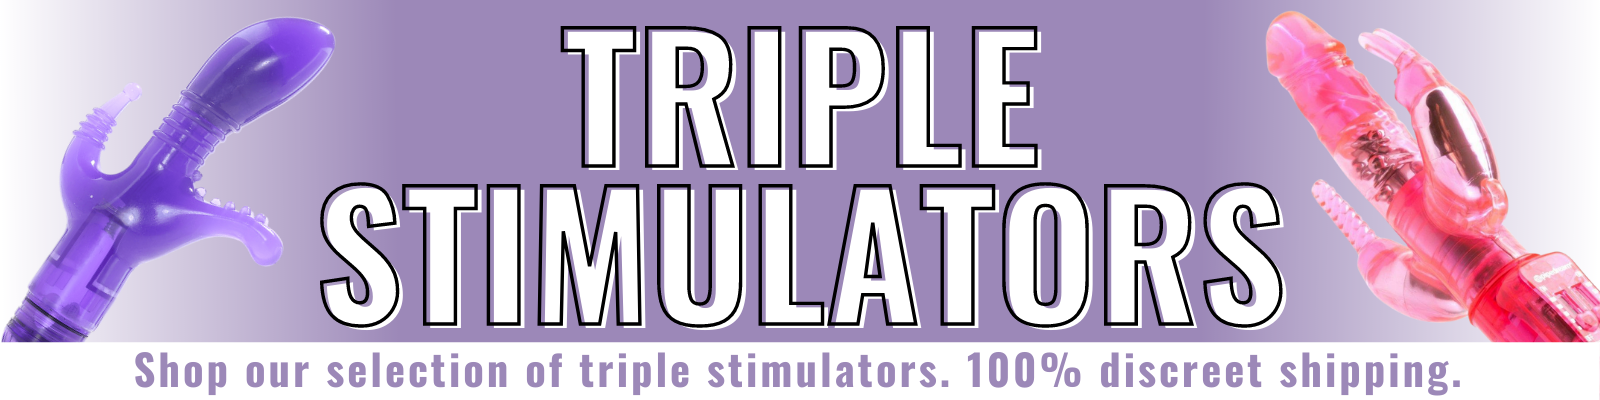 Banner for our triple stimulators collection. Banner reads: Triple stimulators. Shop our selection of triple stimulators. 100% discreet shipping.